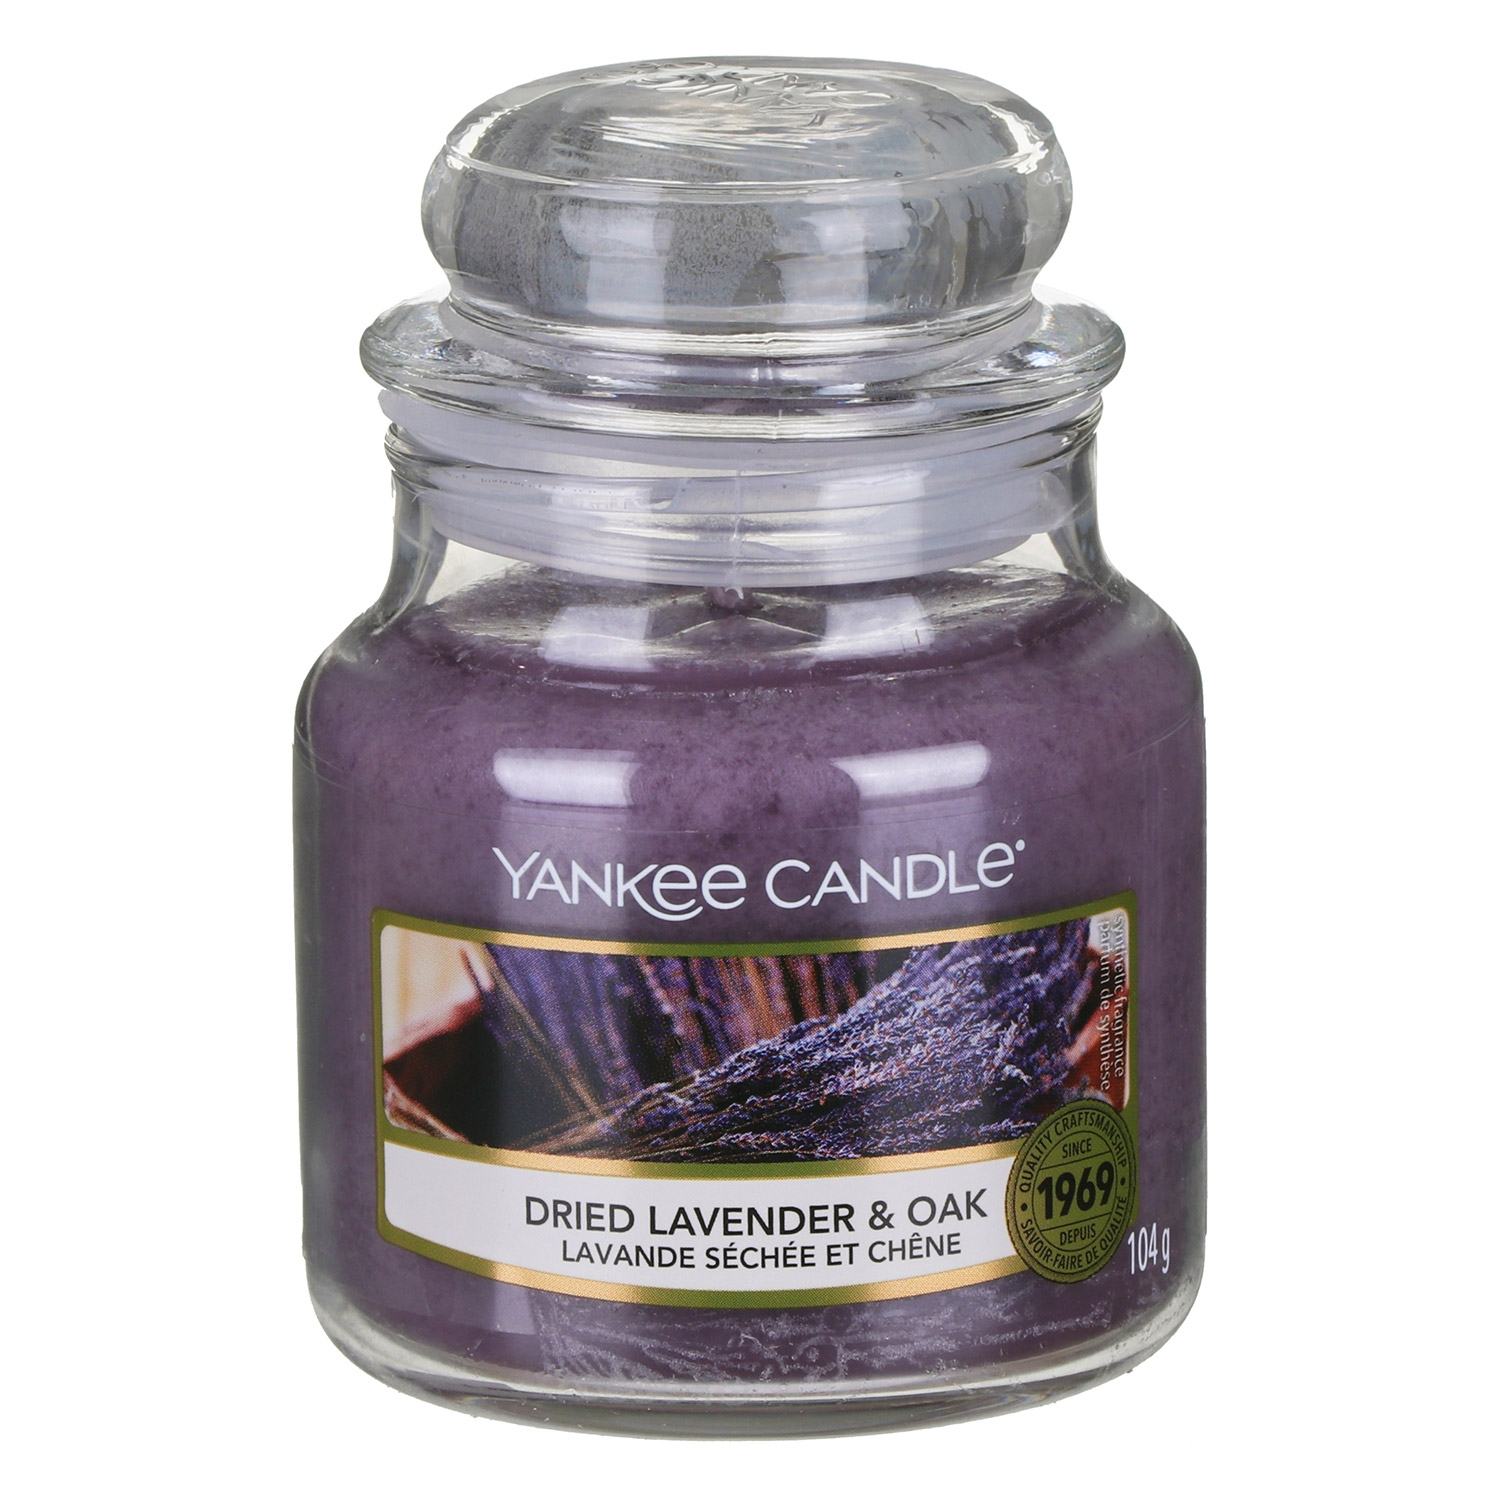 Yankee Candles Classic Small Jar Dried Lavender & Oak 104G - AllurebeautypkYankee Candles Classic Small Jar Dried Lavender & Oak 104G